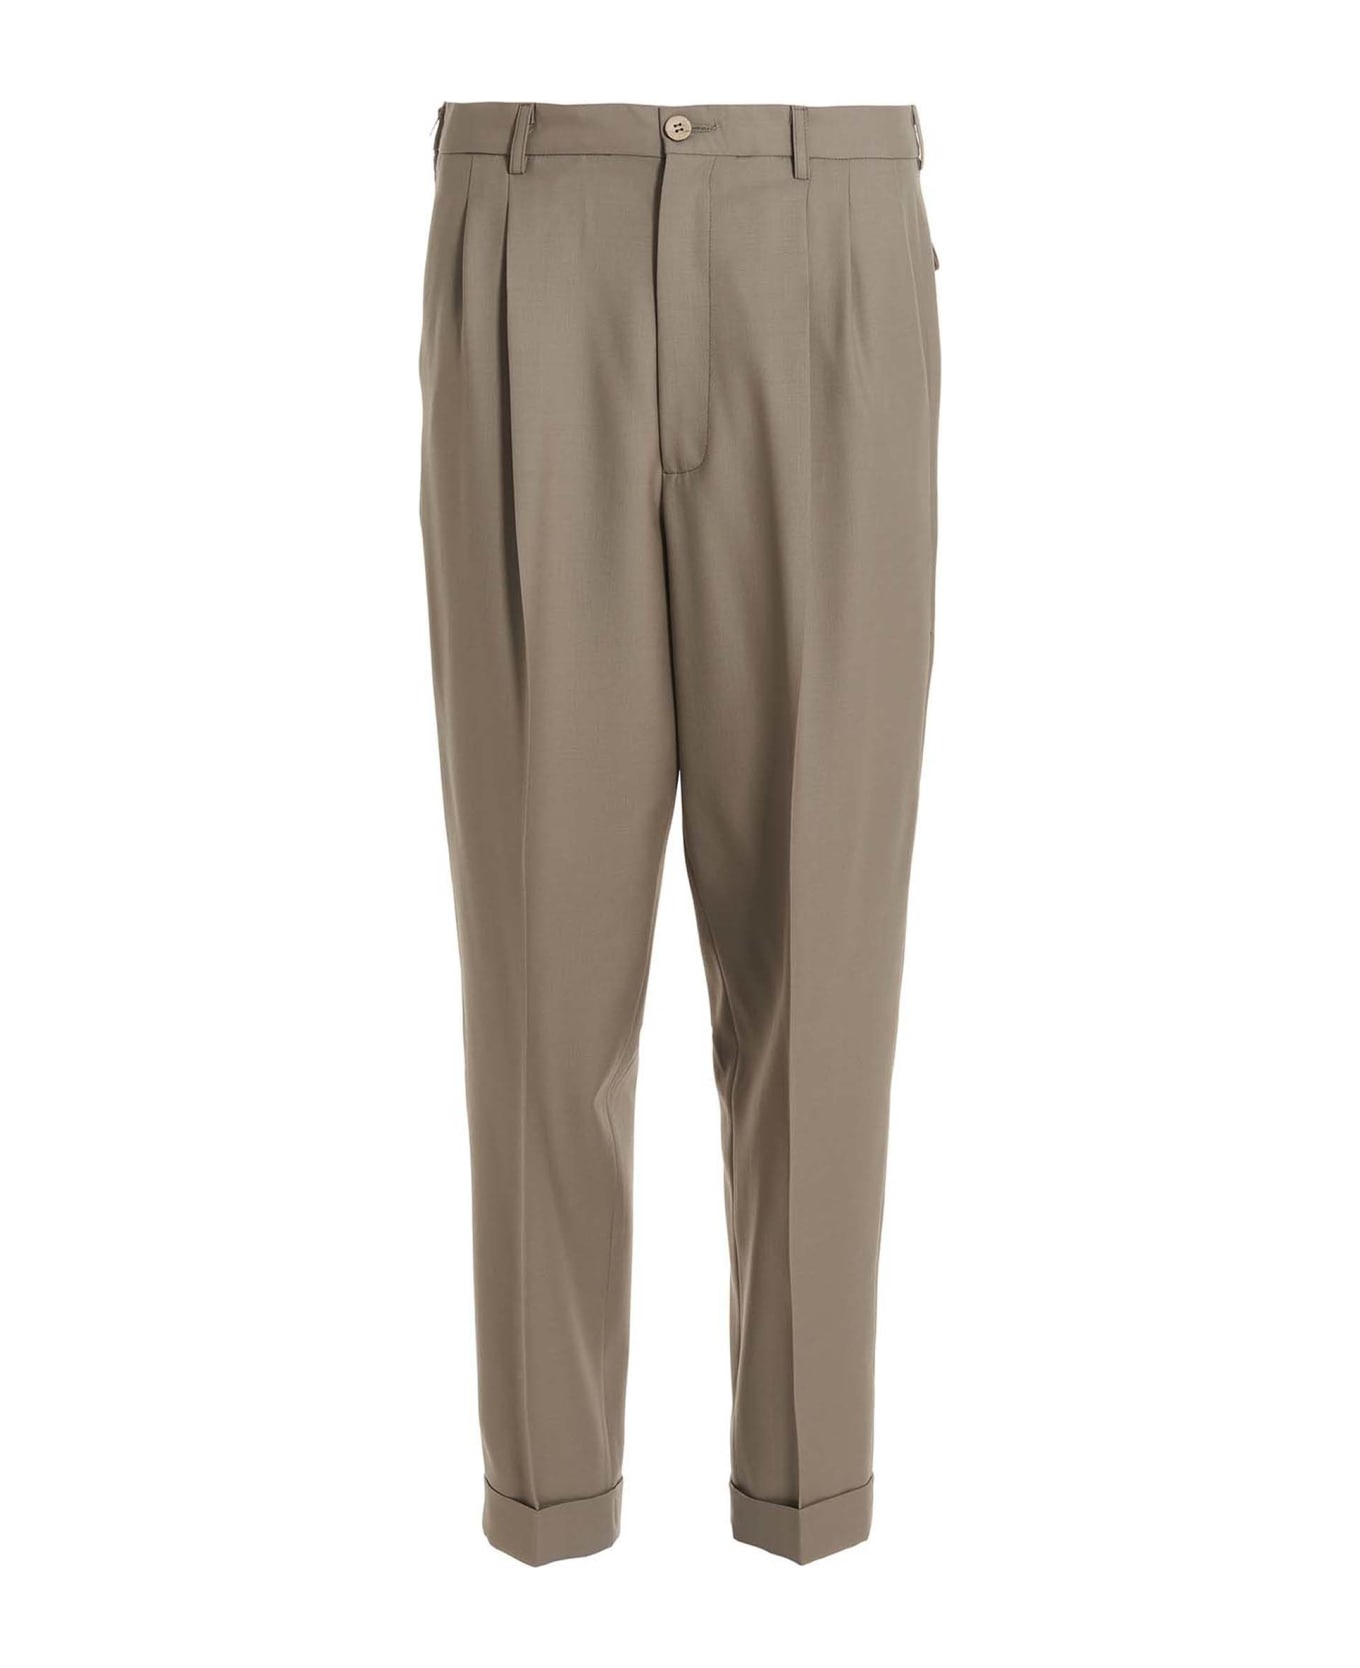 Magliano Classic Double Pleated' Pants - Beige